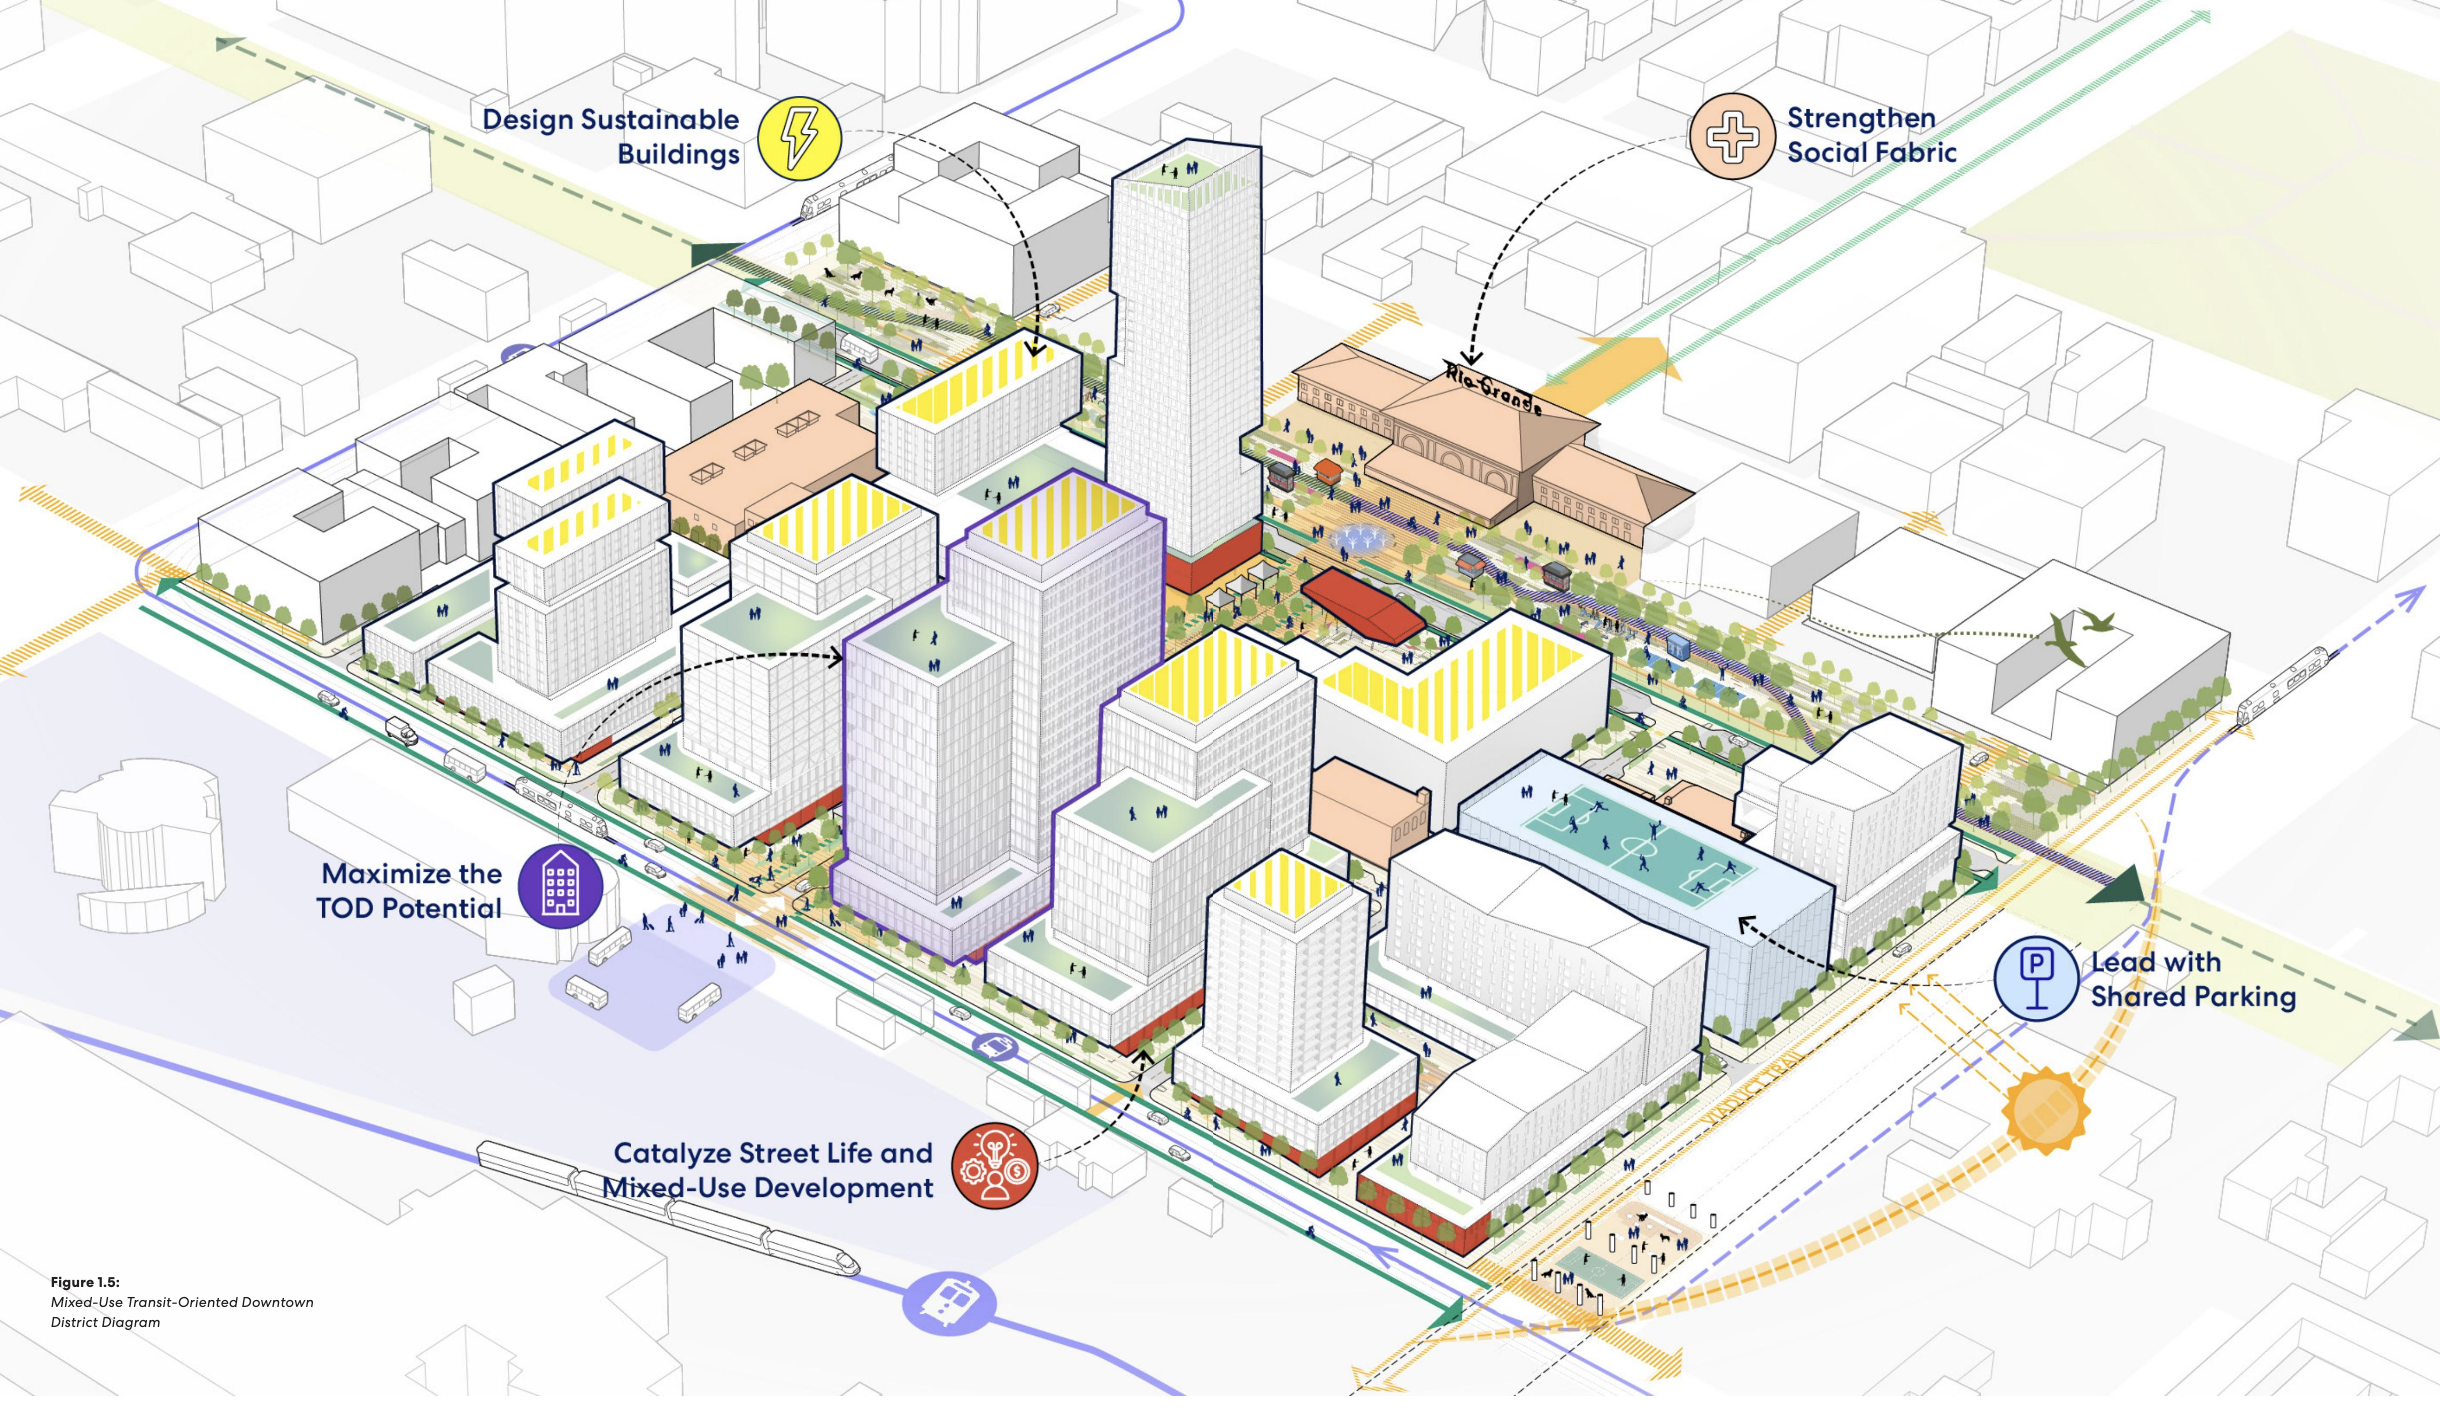 Project plans show how new development would be oriented toward transit services, with pedestrian-friendly street designs, new mid-block connections and a multi-level parking structure. - SALT LAKE CITY RDA